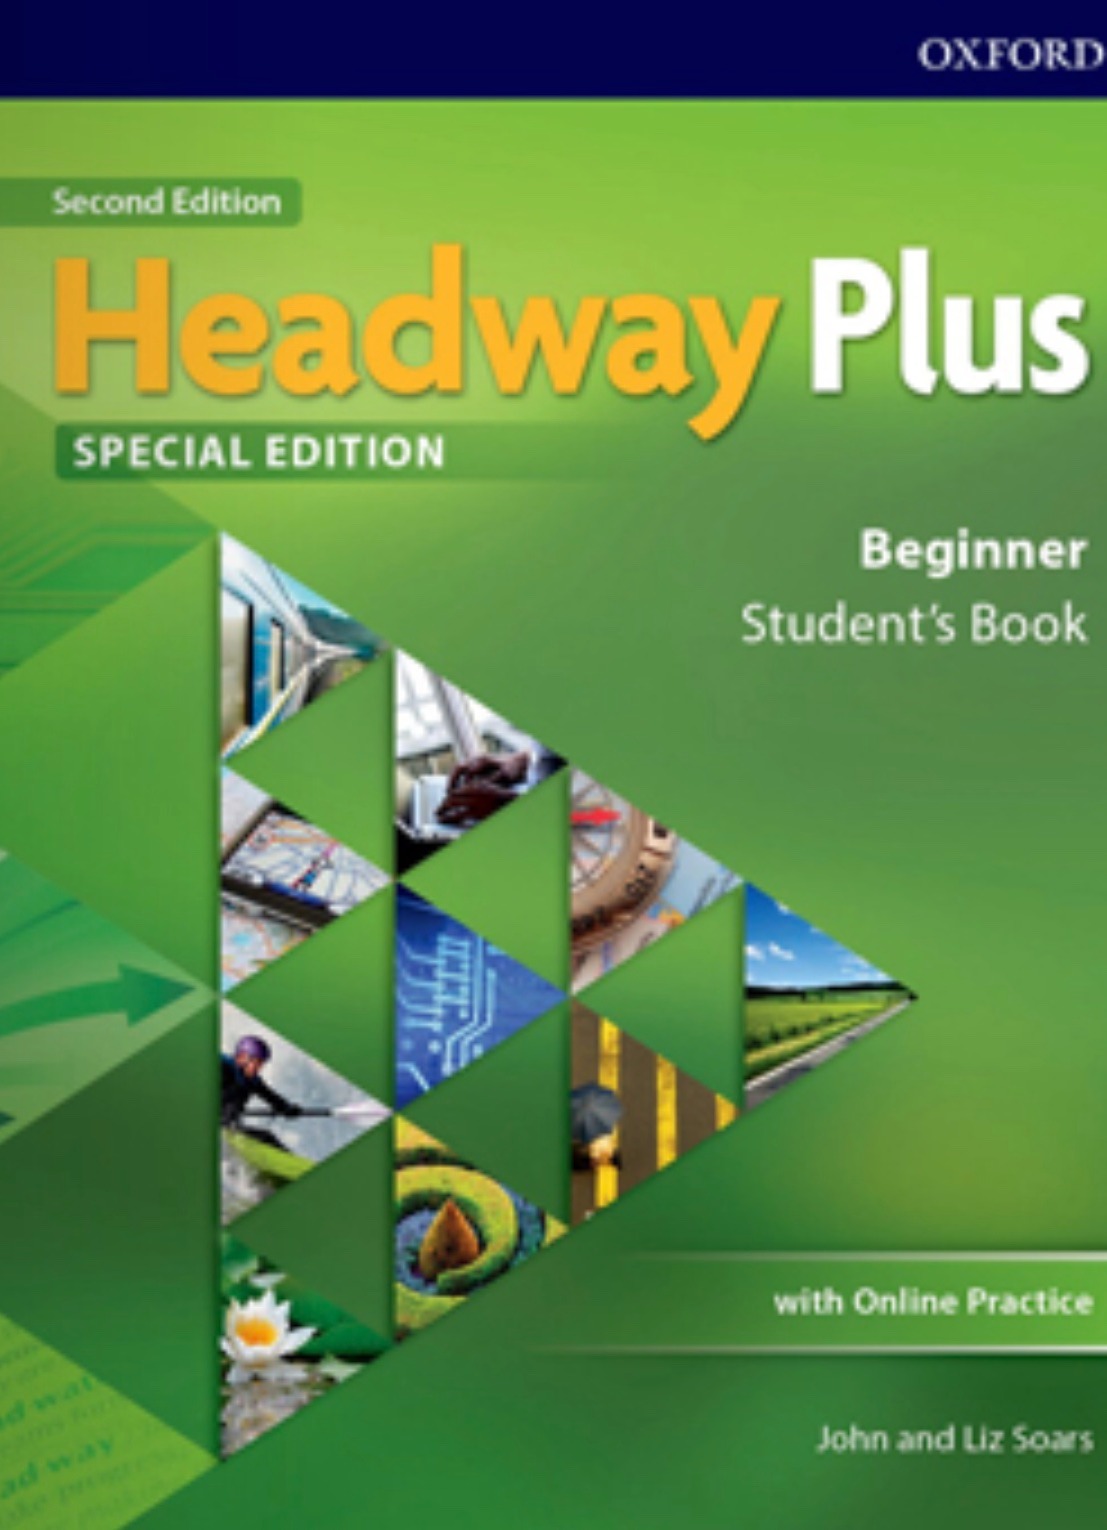 New headway 5th edition. Oxford 5th Edition Headway. New Headway English course 2 издание. Headway Beginner 5th Edition. Headway 5 Beginner Edition Workbook.